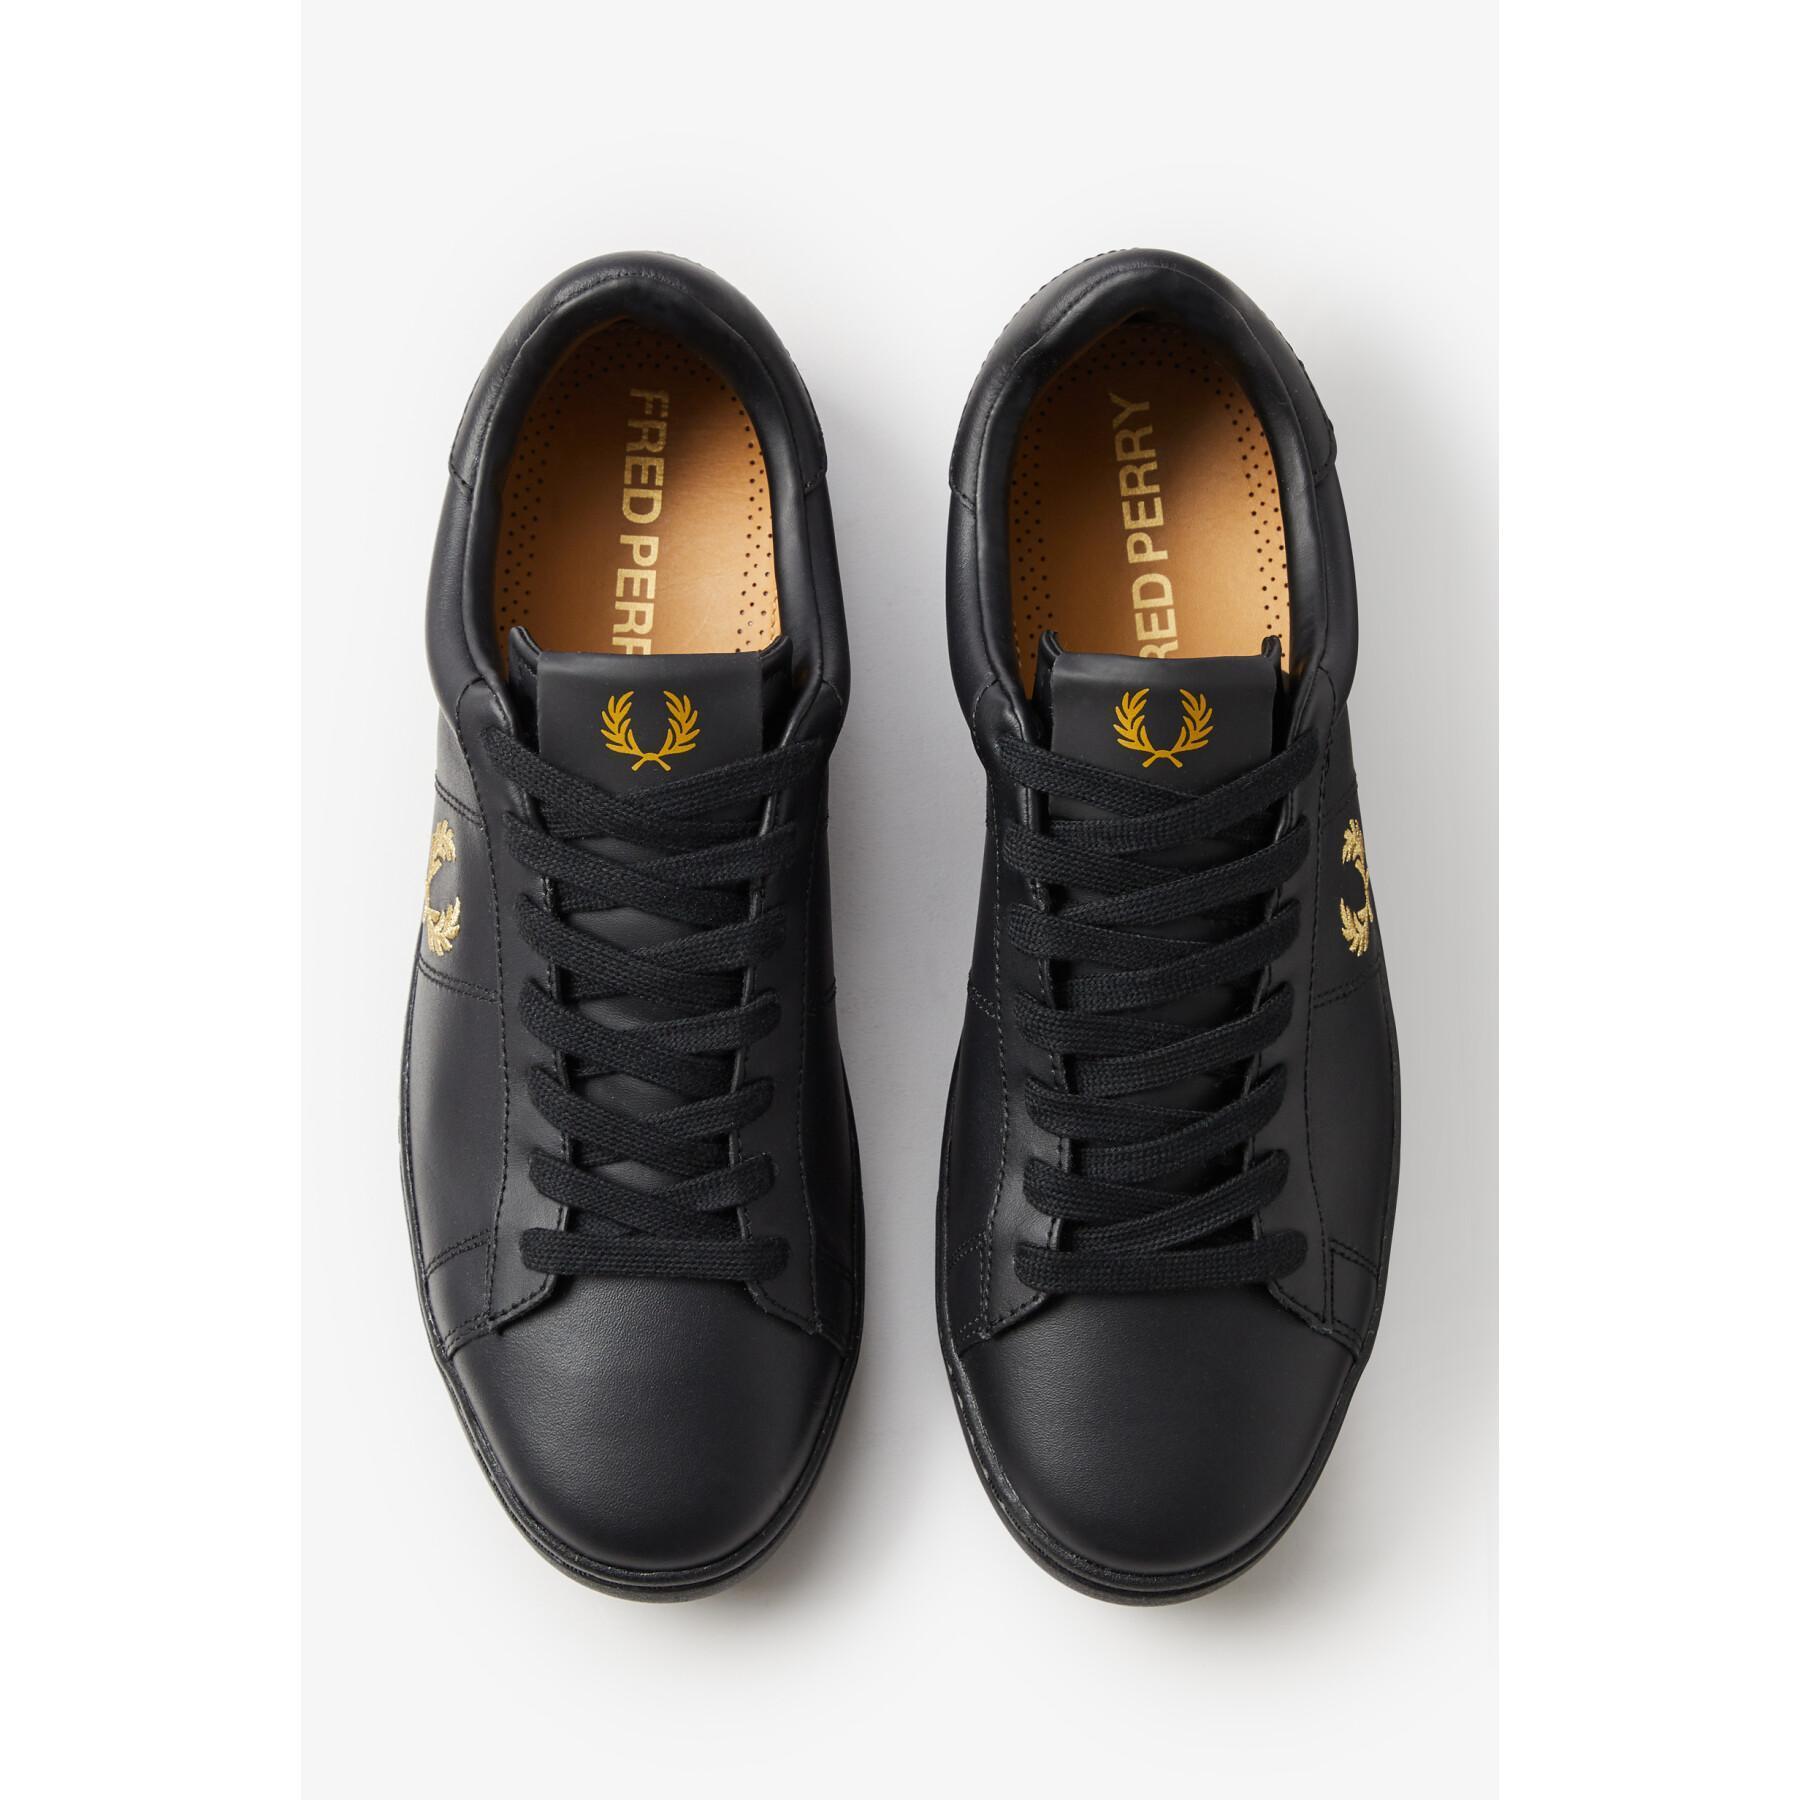 Instrutores Fred Perry B300 Scotchgrain Leather